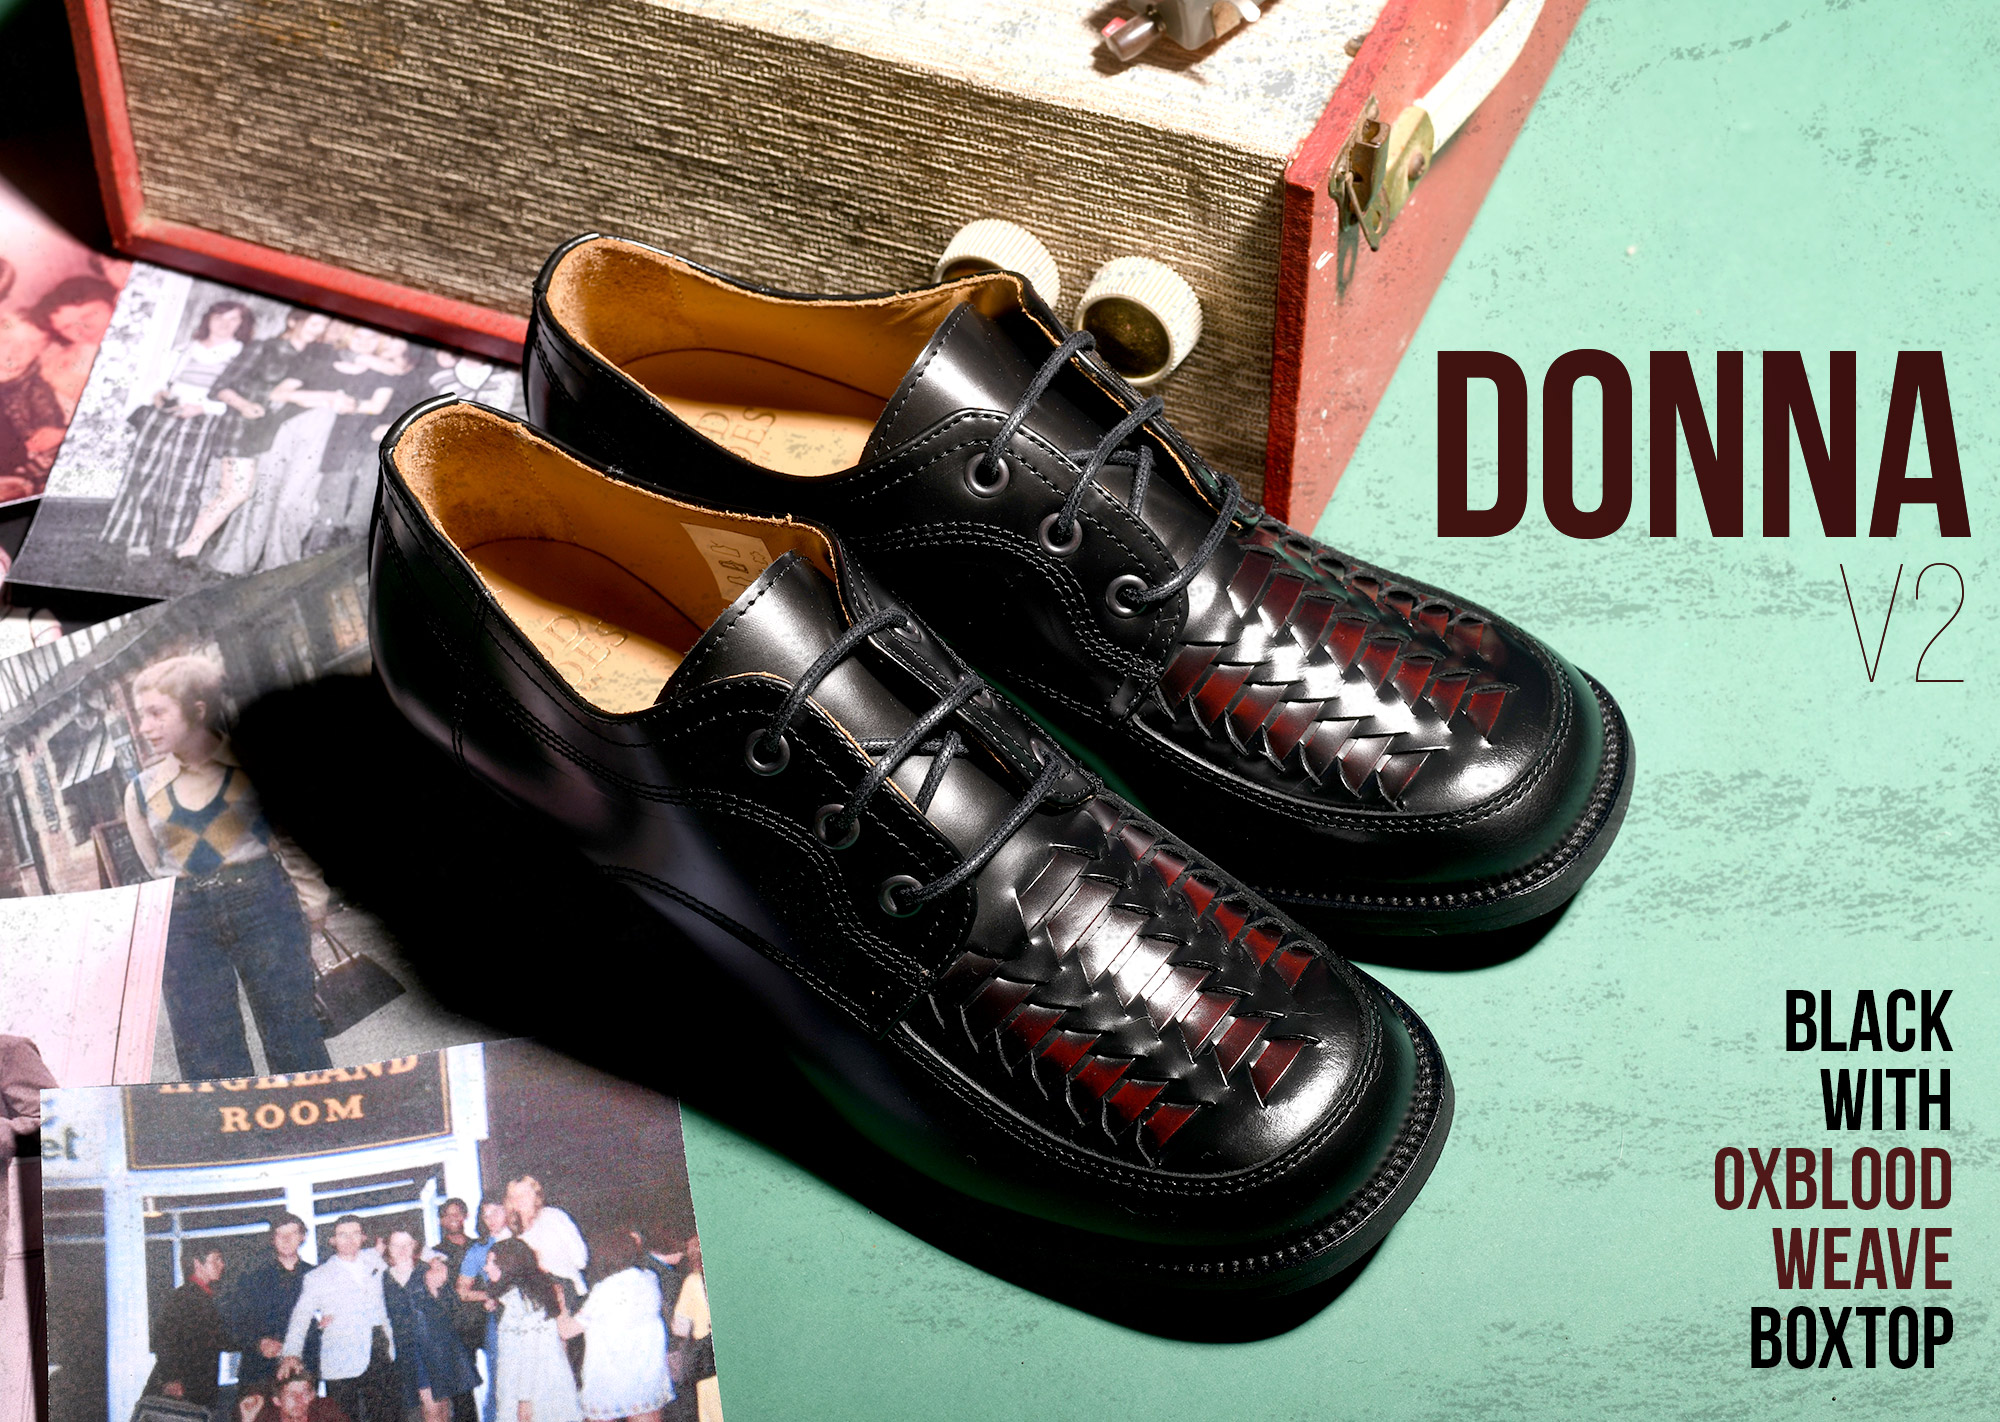 https://www.modshoes.co.uk/wp-content/uploads/2023/12/modshoes-the-donna-V2-box-tops-leather-in-black-with-oxblood-weave-nothern-soul-ska-skinhead-womens-shoes-01.jpg